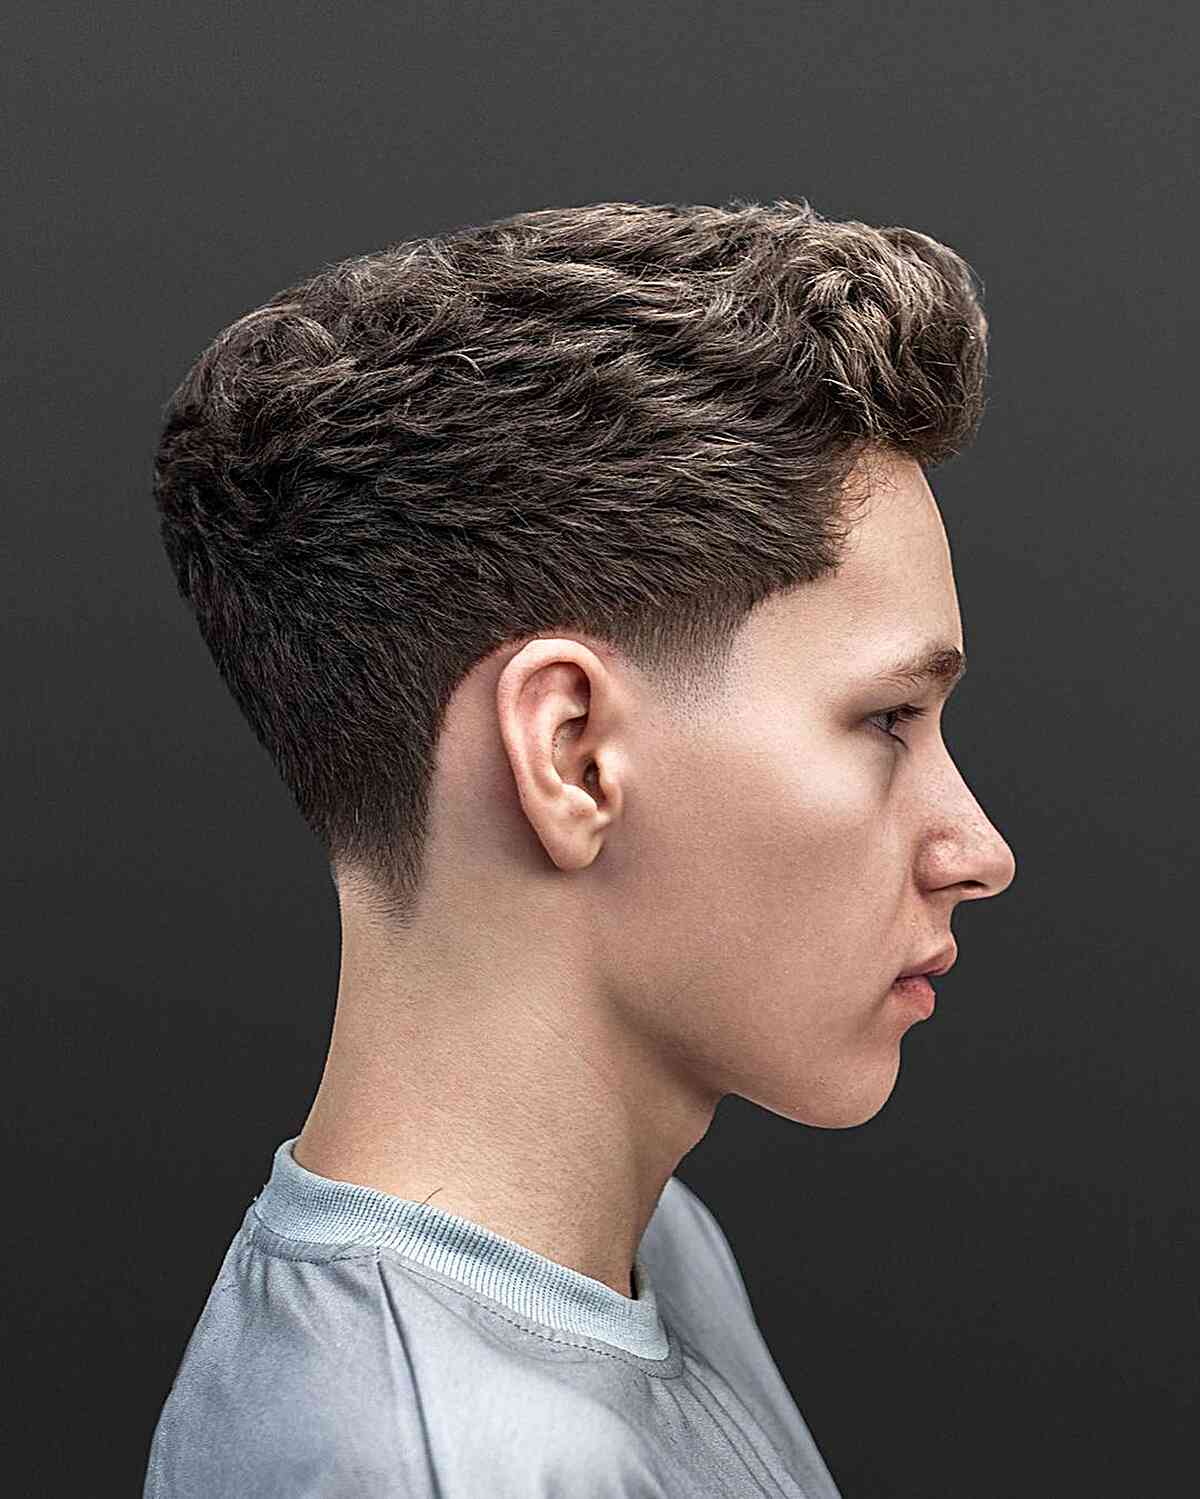 Rough Thick Top for Teen Boys with Medium-Length Brown Hair with tapered sides